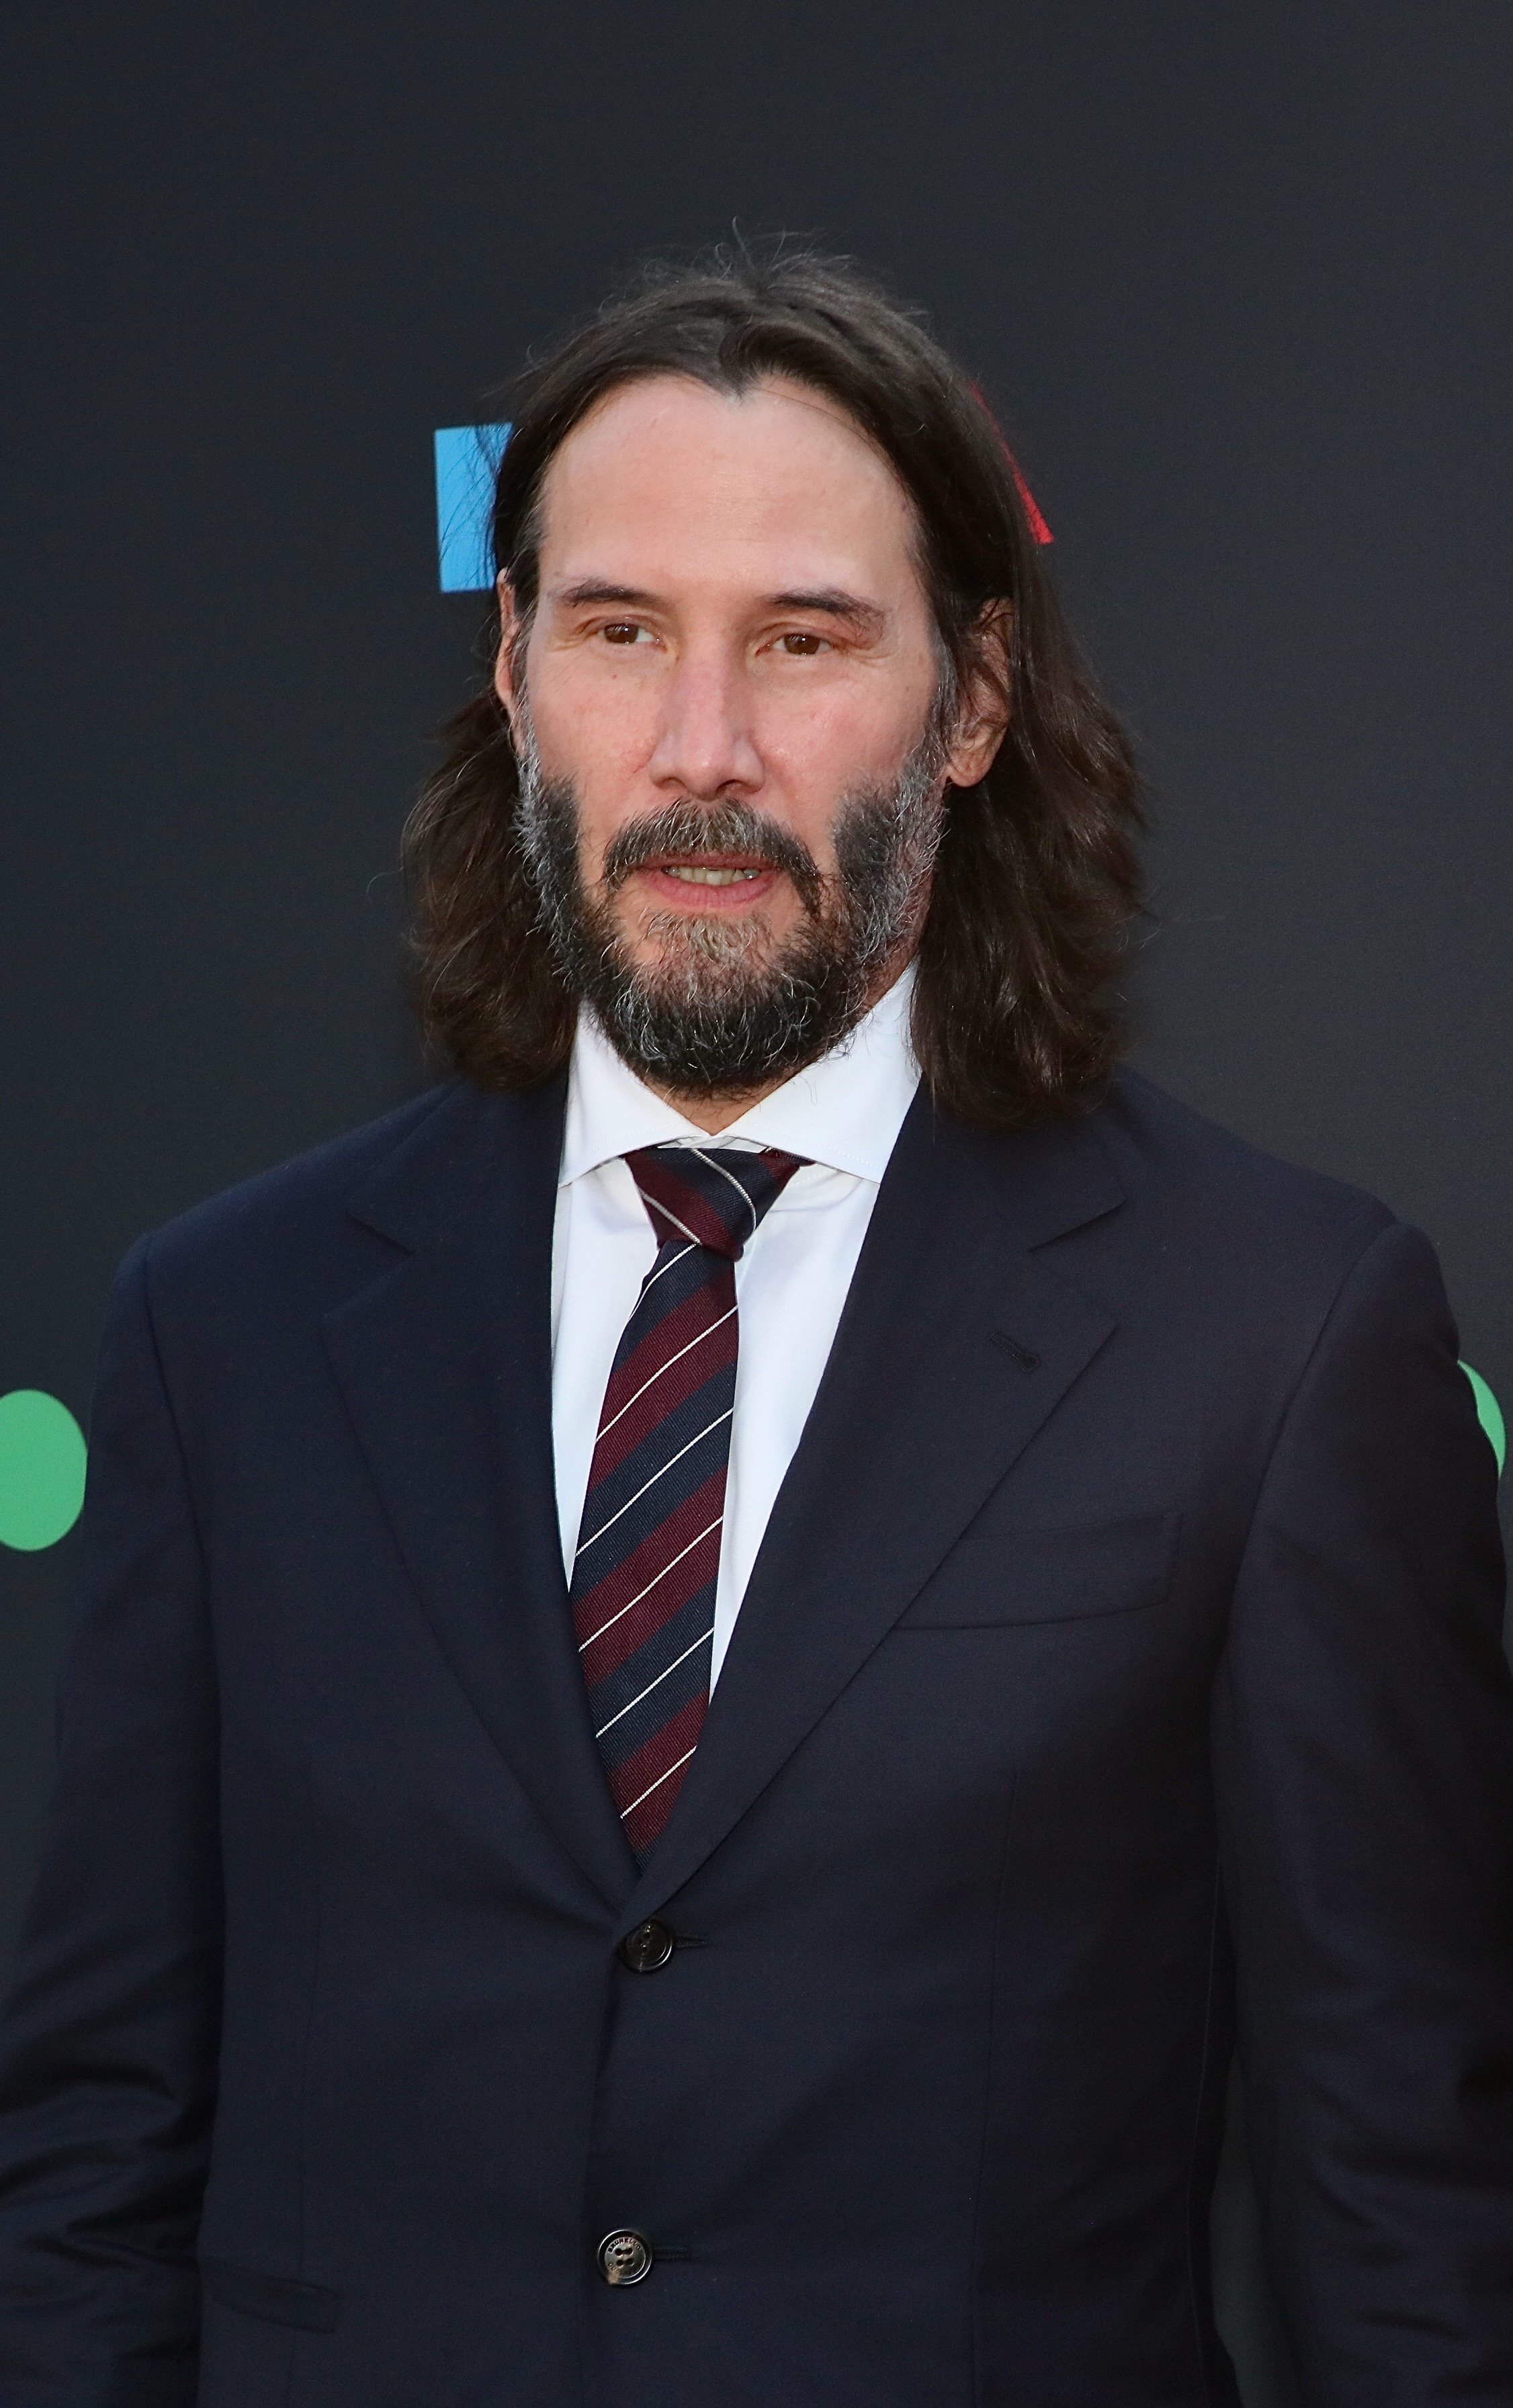 Keanu Reeves attends MOCA Gala 2022 at The Geffen Contemporary at MOCA on June 4, 2022 in Los Angeles, California. | Source: Getty Images